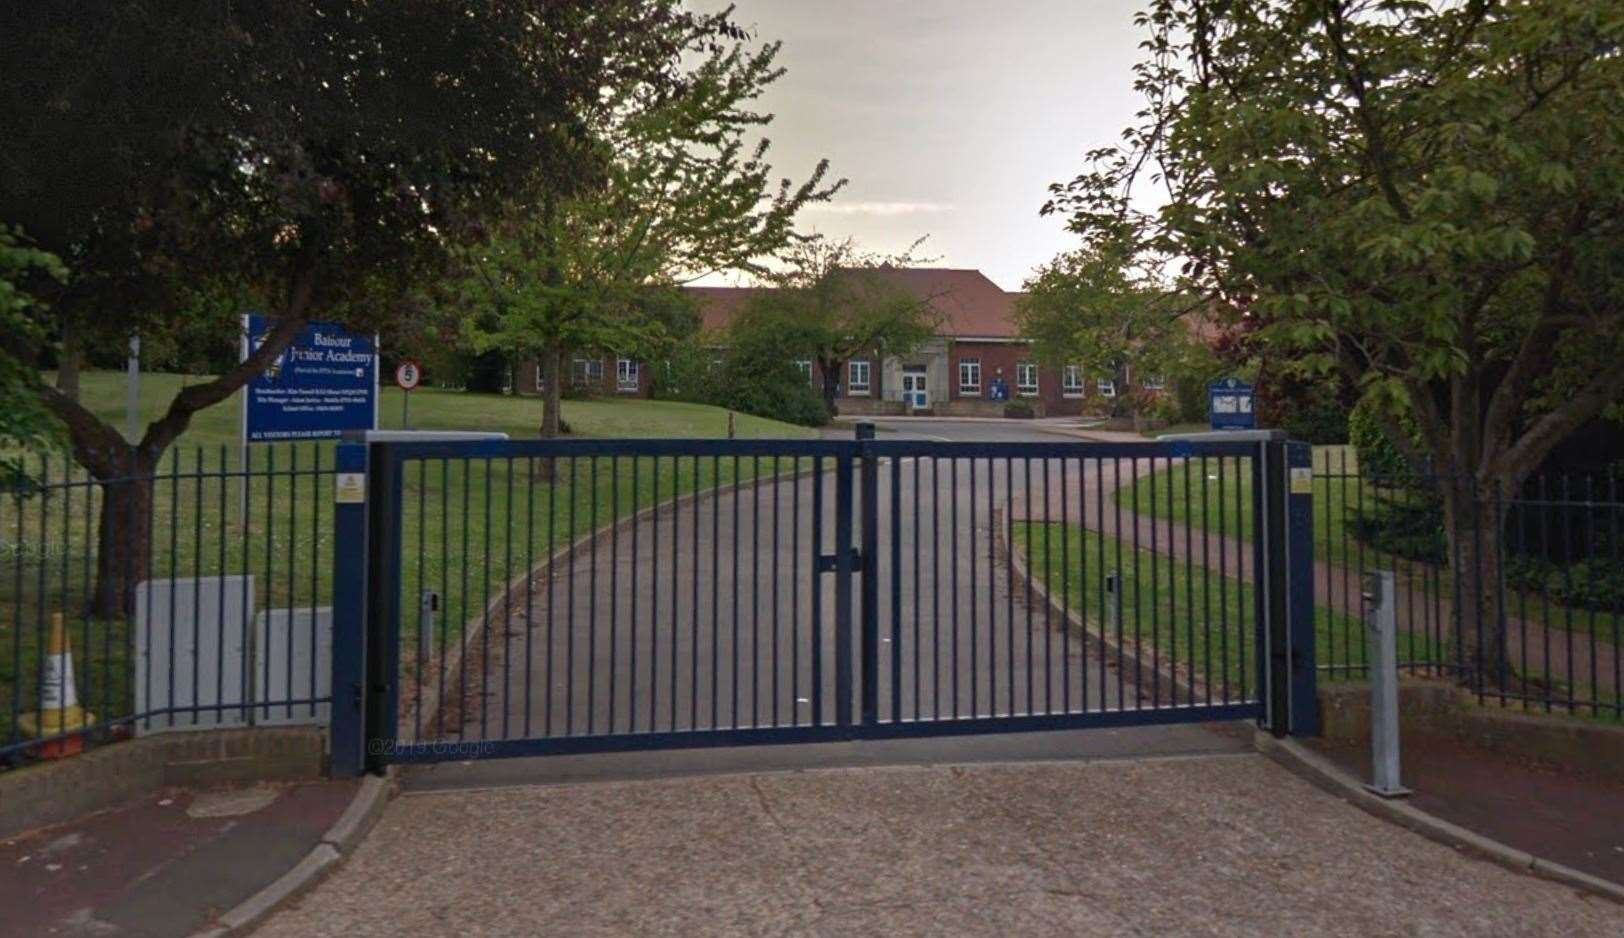 Balfour Junior Academy, in Chatham, is the latest school to send pupils home due to the coronavirus. Picture: Google Maps